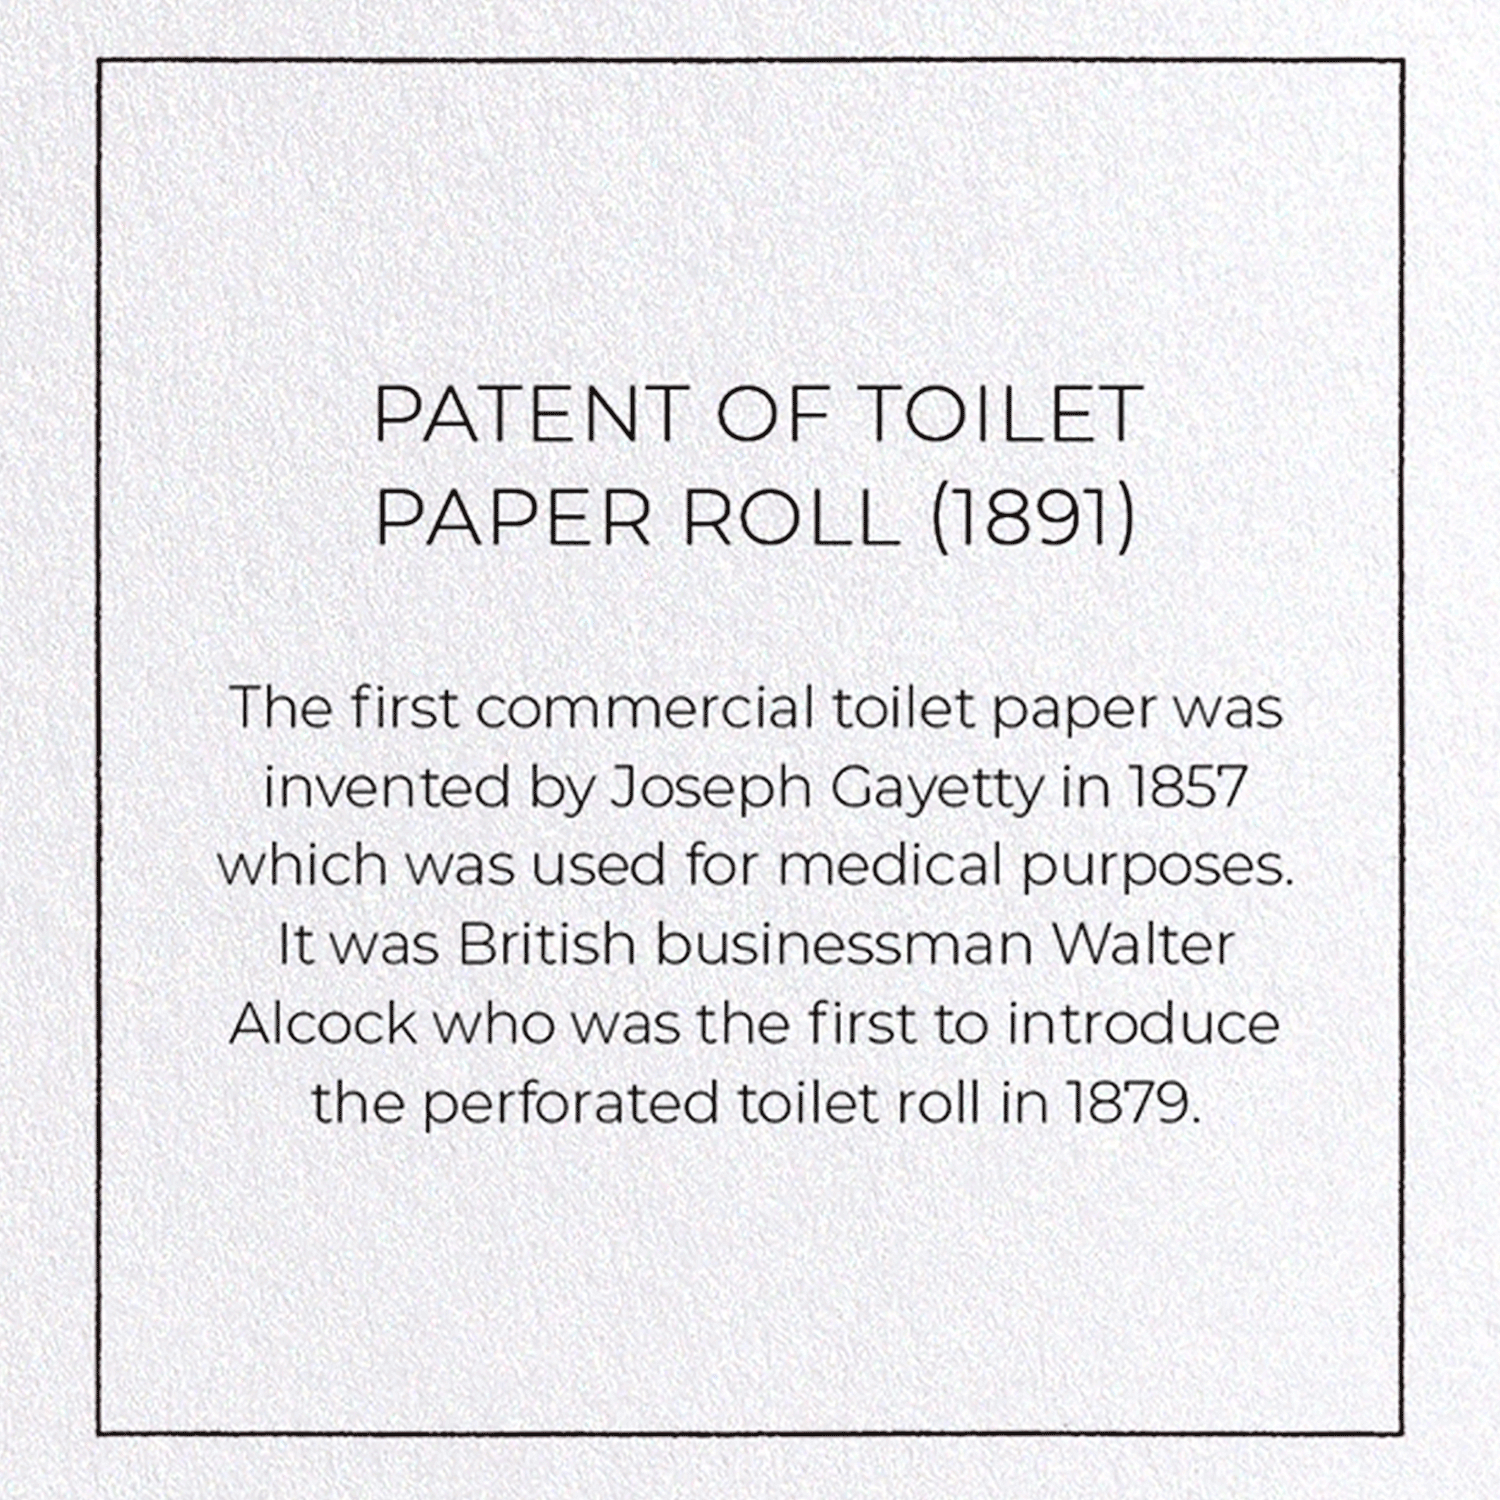 PATENT OF TOILET PAPER ROLL (1891)